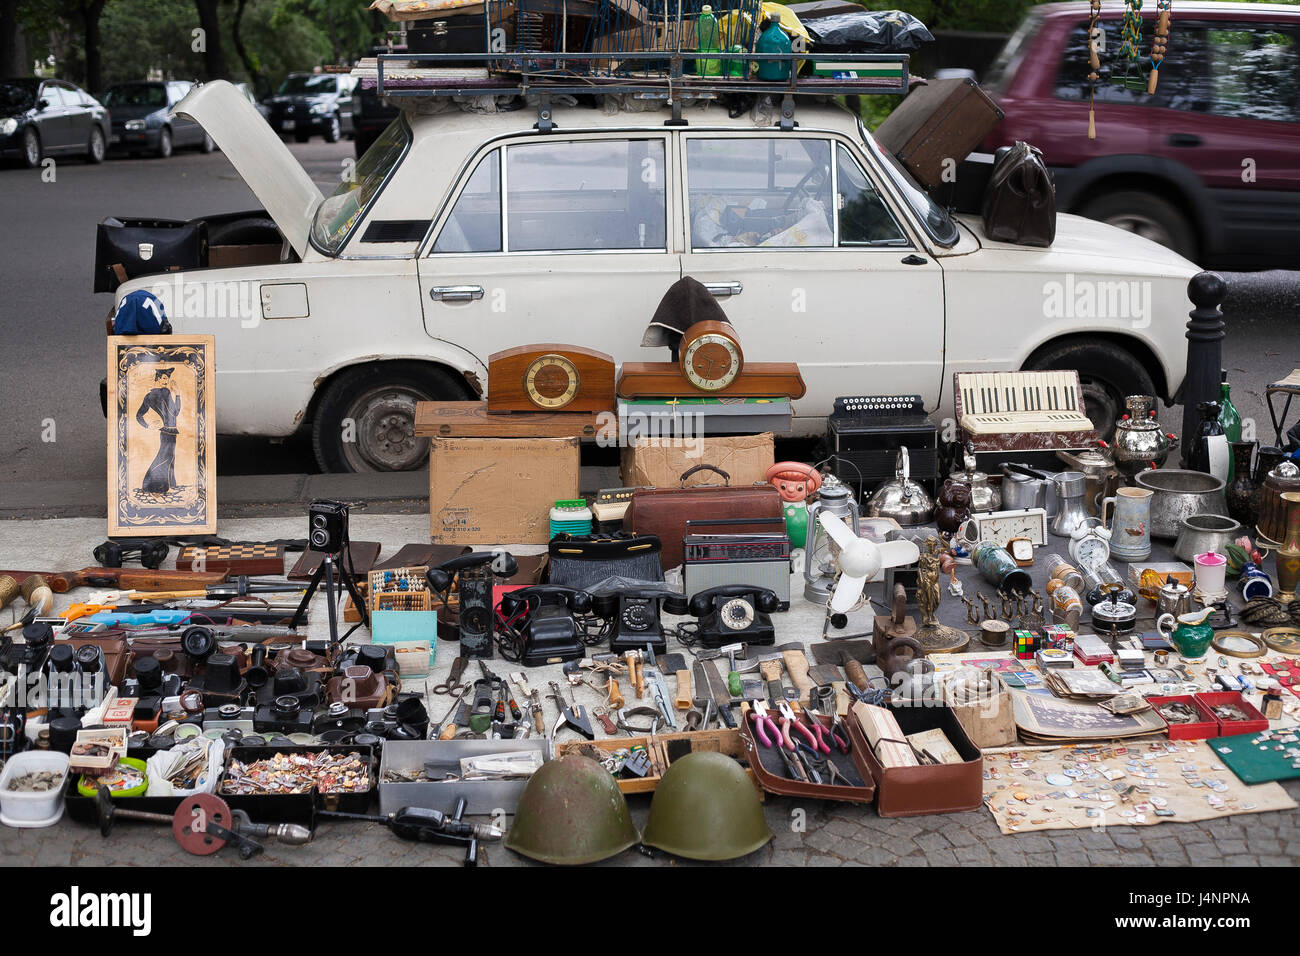 Goods displayed on a Lada car and the pavement at the weekly Dry Bridge Market flea market in Central Tbilisi, Georgia Stock Photo